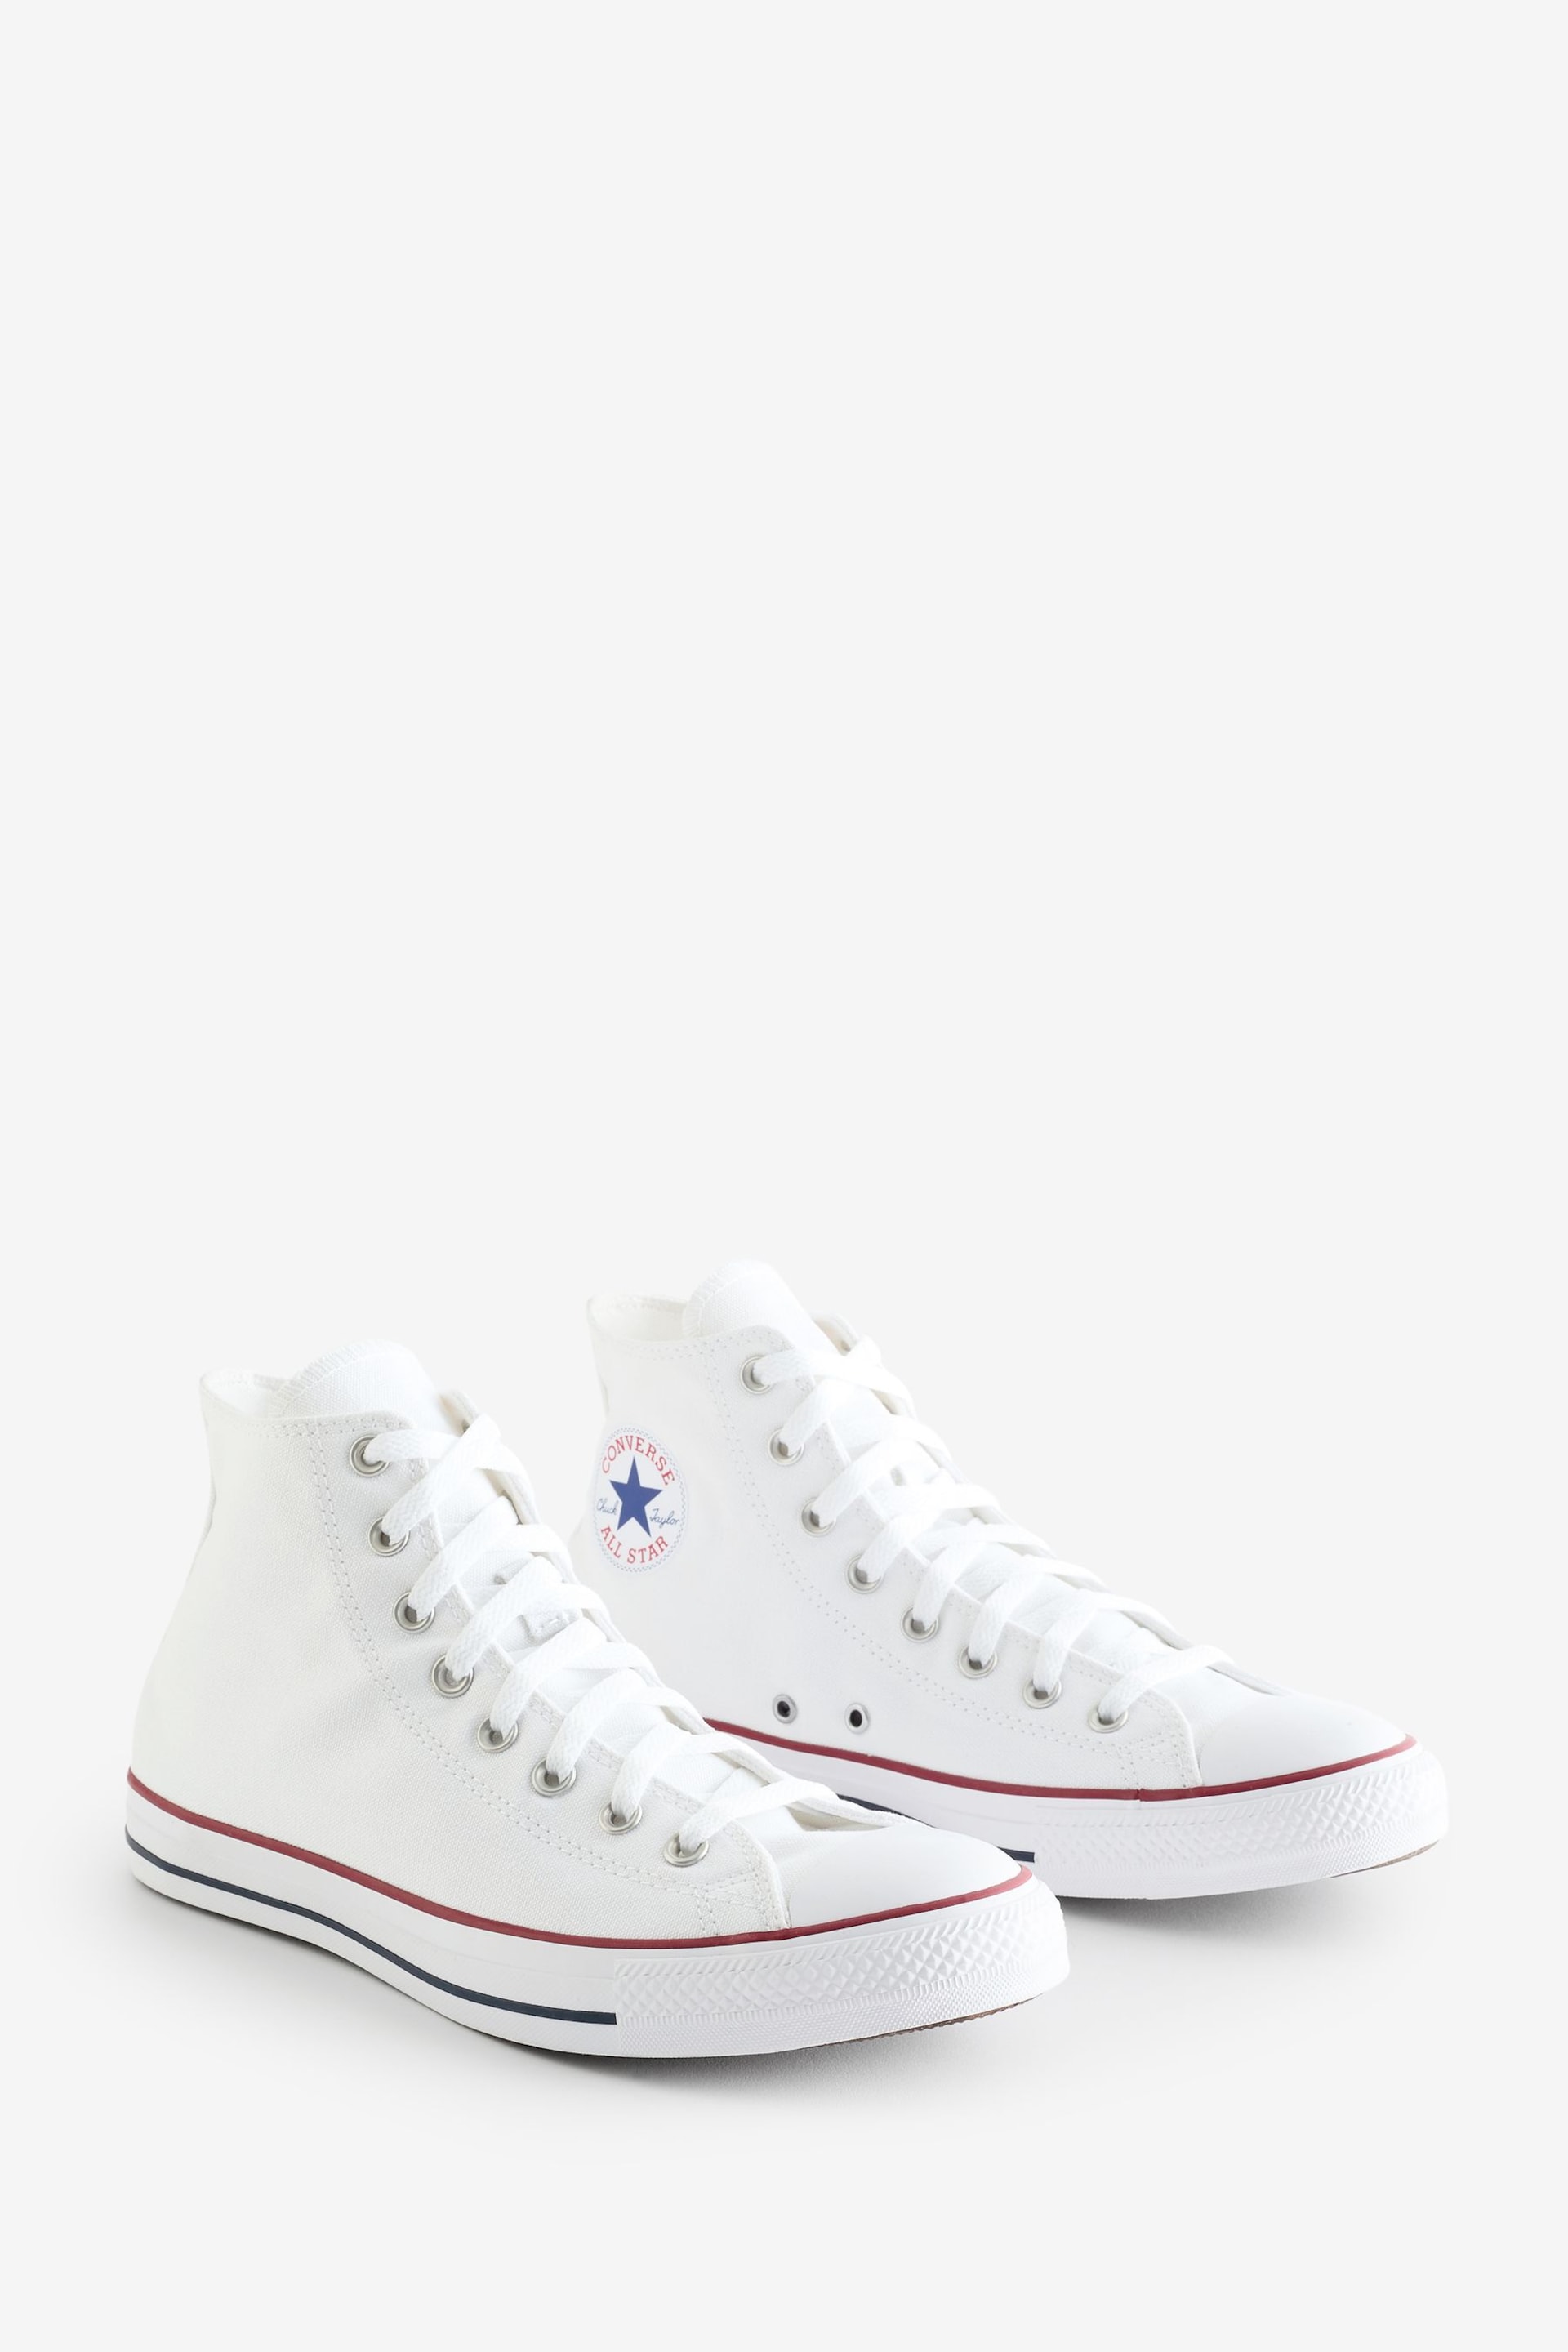 Converse White Chuck Taylor All Star Wide High Top Trainers - Image 3 of 8